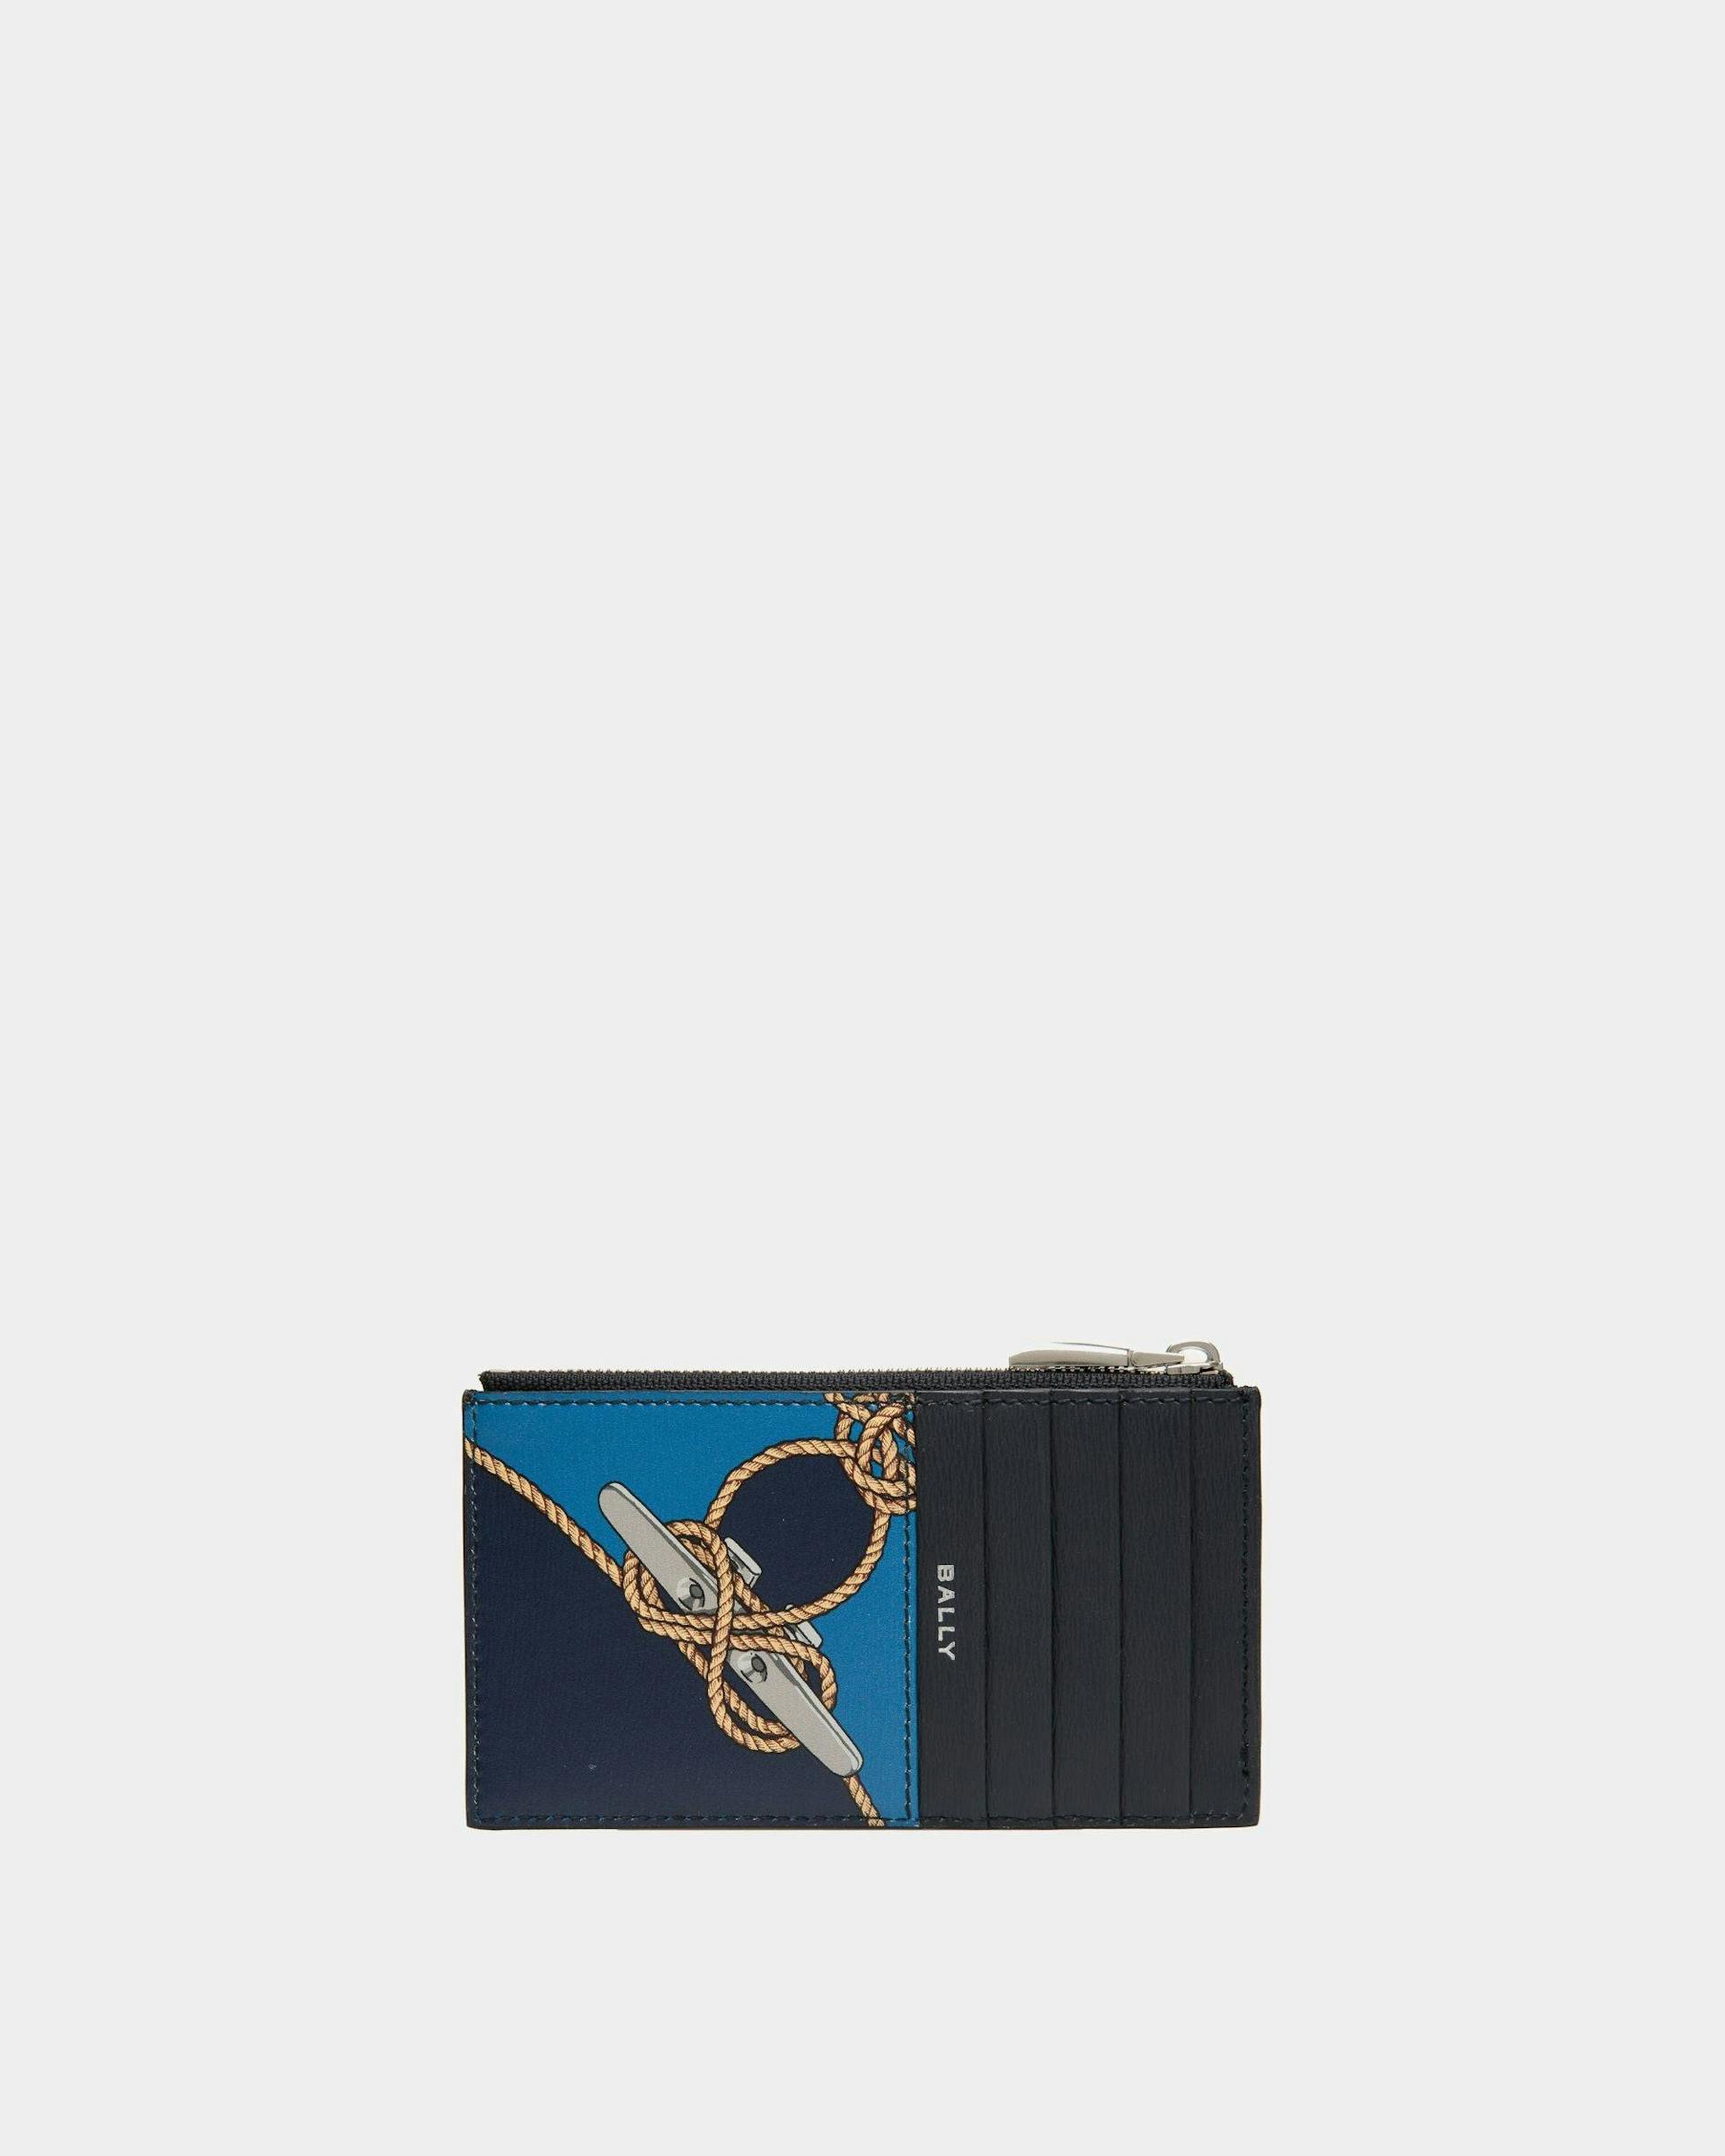 Men's Crossing Coin & Card Holder in Blue Leather | Bally | Still Life Back